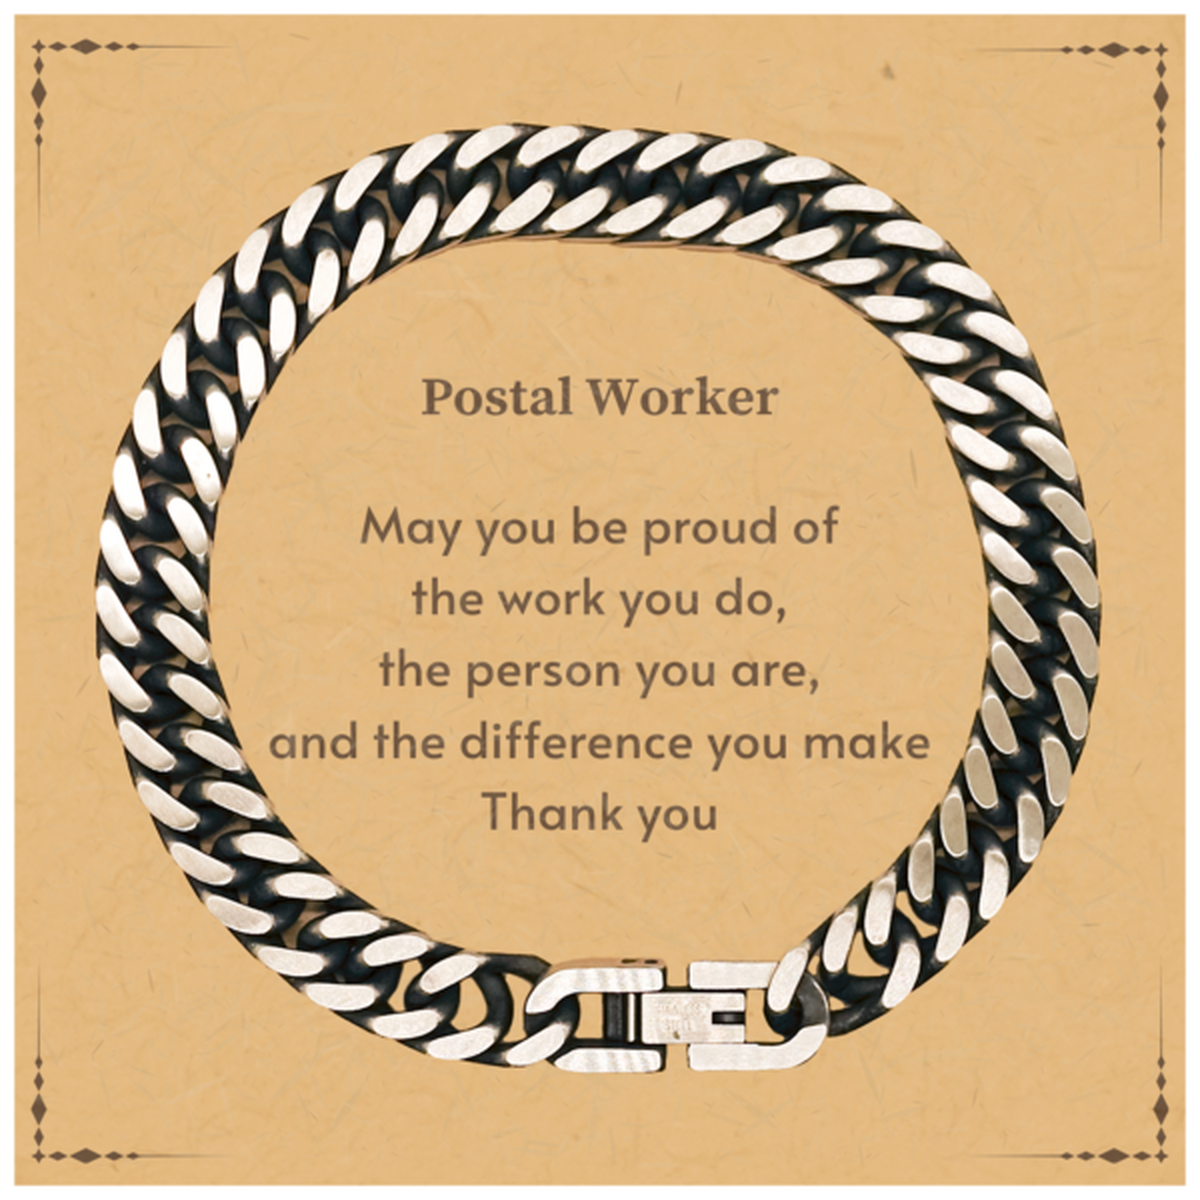 Heartwarming Cuban Link Chain Bracelet Retirement Coworkers Gifts for Postal Worker, Postal Worker May You be proud of the work you do, the person you are Gifts for Boss Men Women Friends